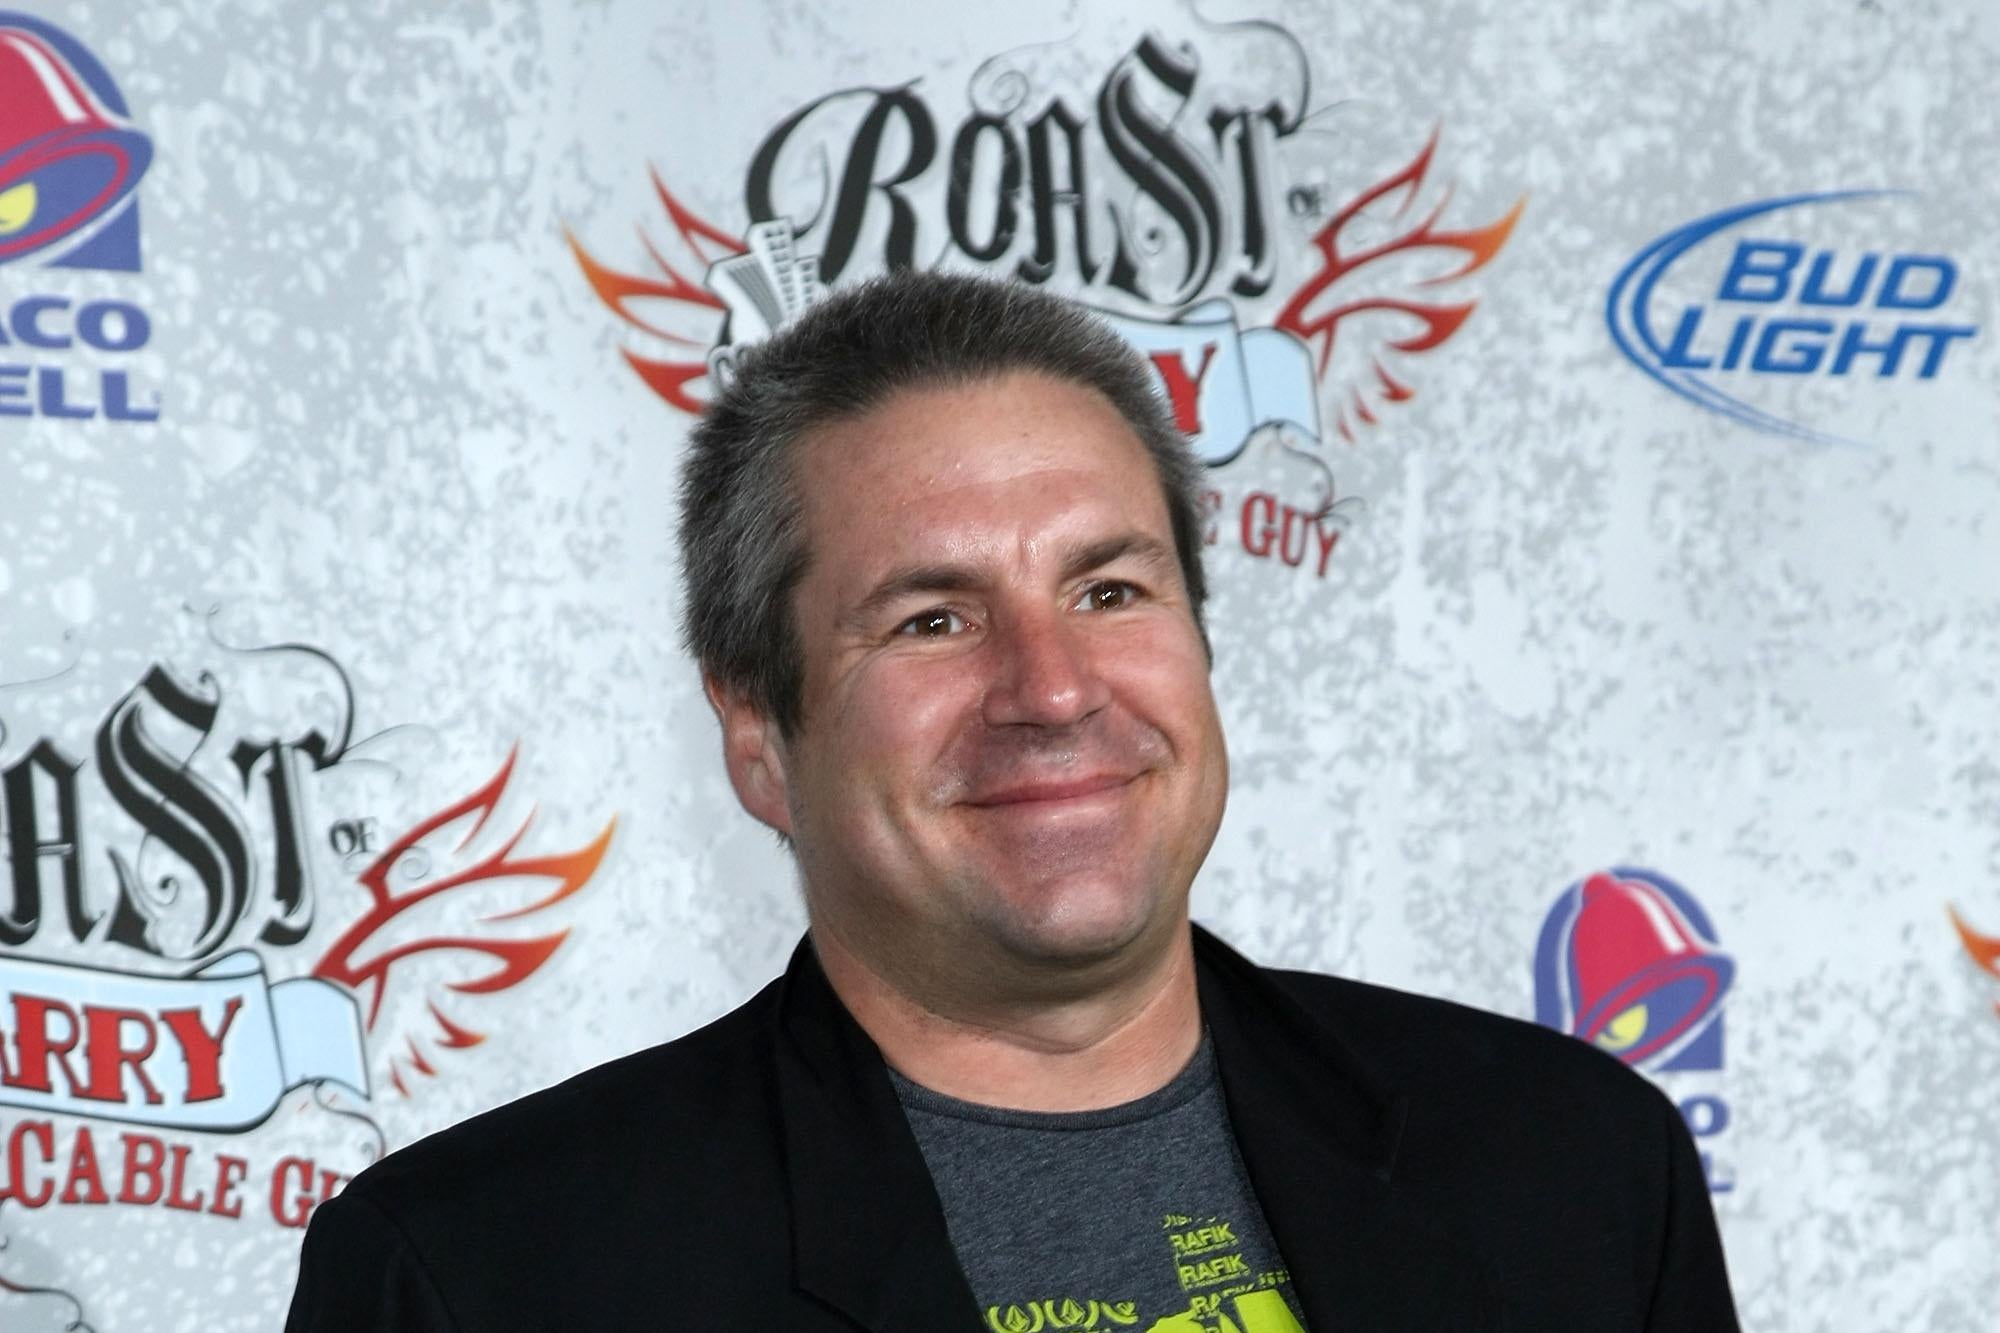 John Melendez arrives for the Comedy Central Roast Of Larry The Cable Guy at the Warner Brother Studio Lot on March 1, 2009 in Burbank.